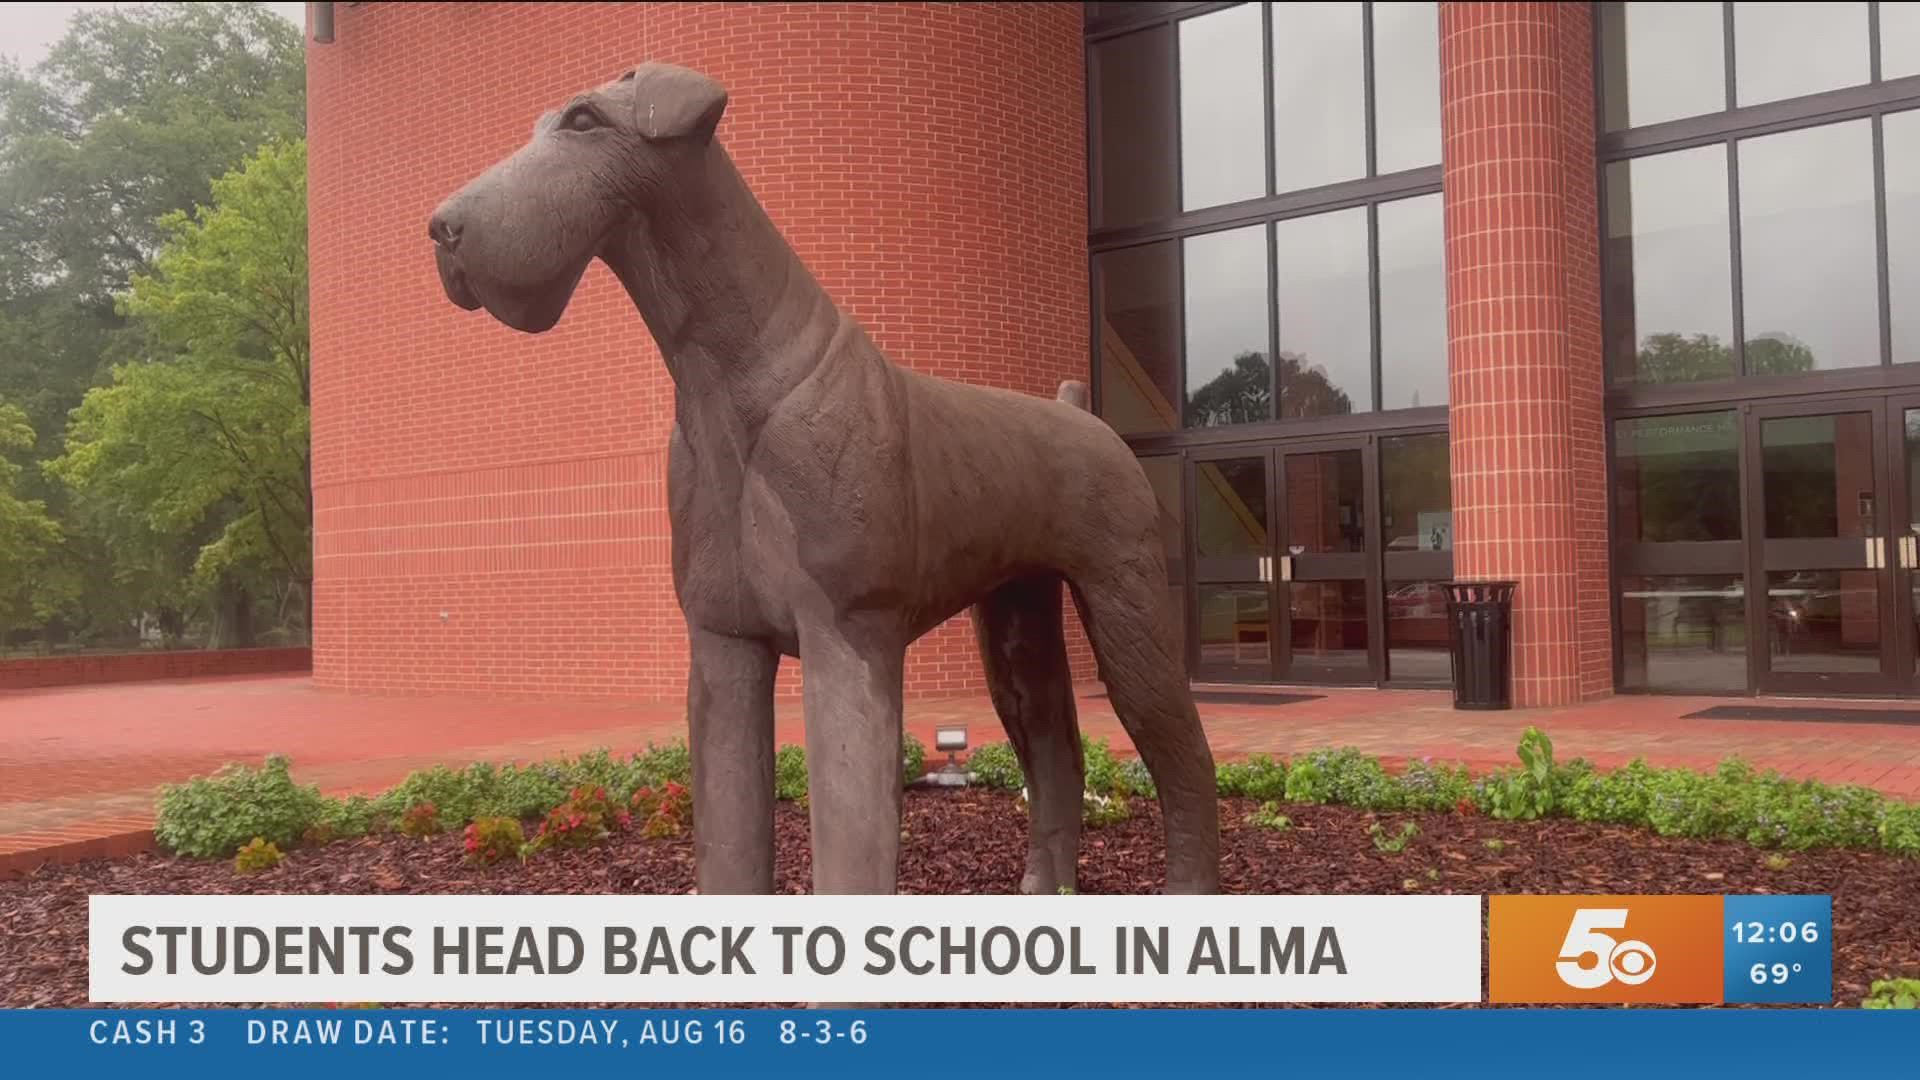 Several construction projects are underway in the Alma School District.